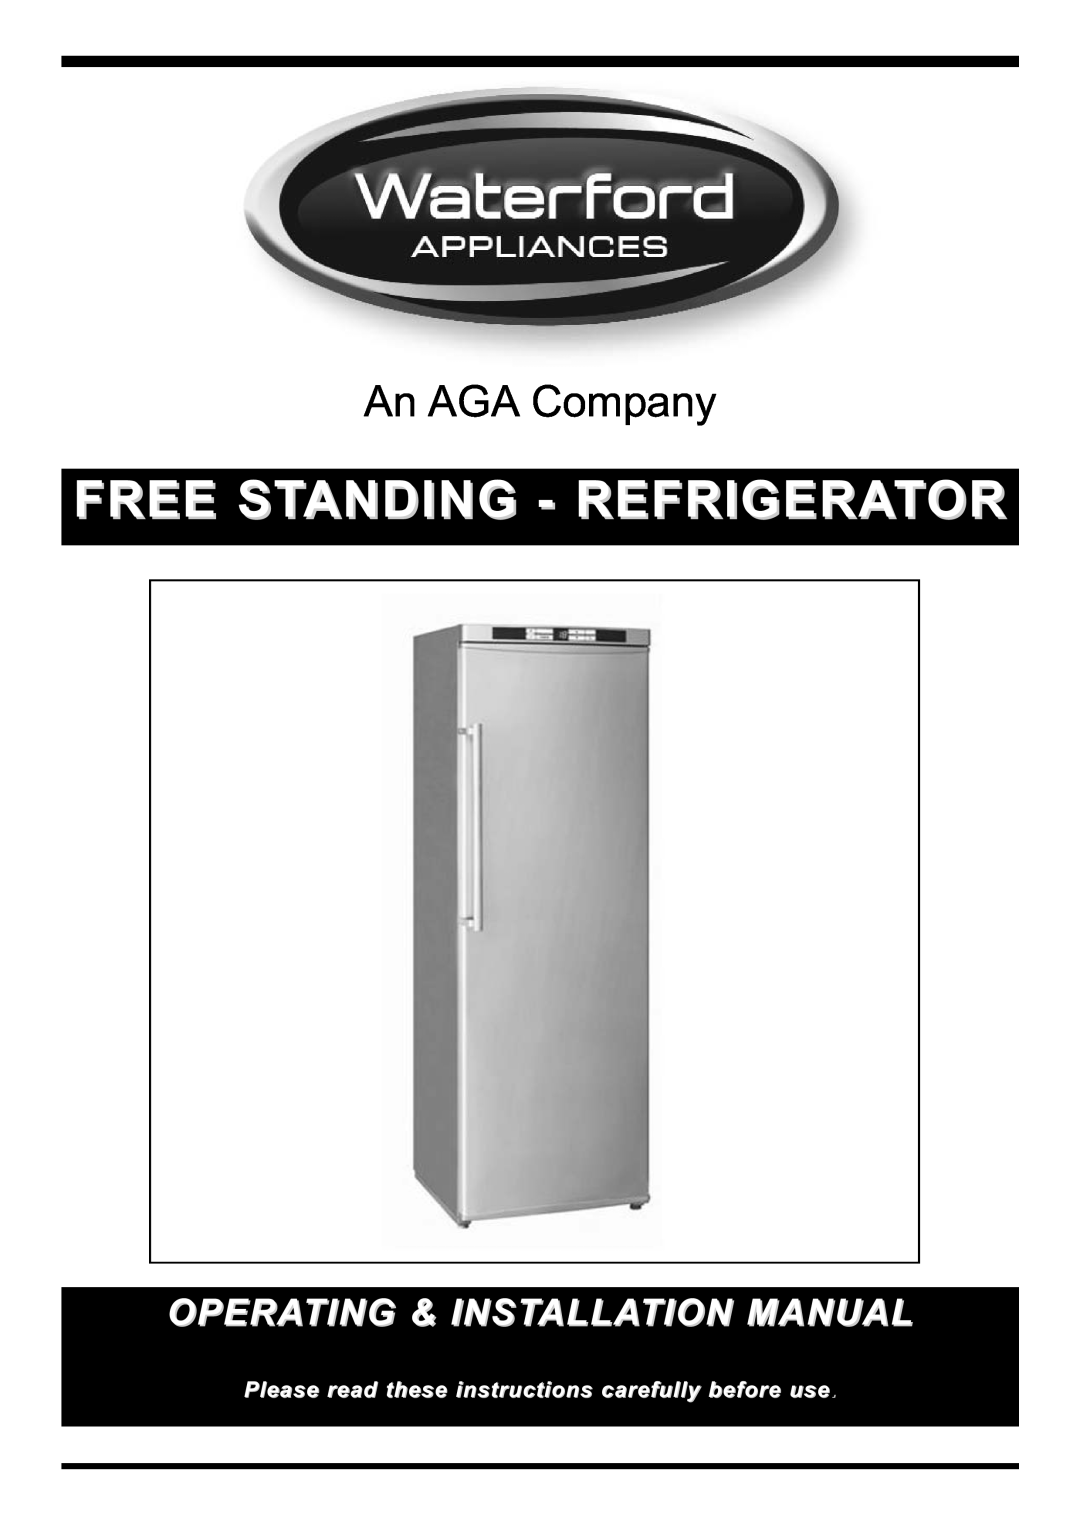 Waterford Appliances Free Standing Refrigerator manual Free Standing - Refrigerator, An AGA Company 